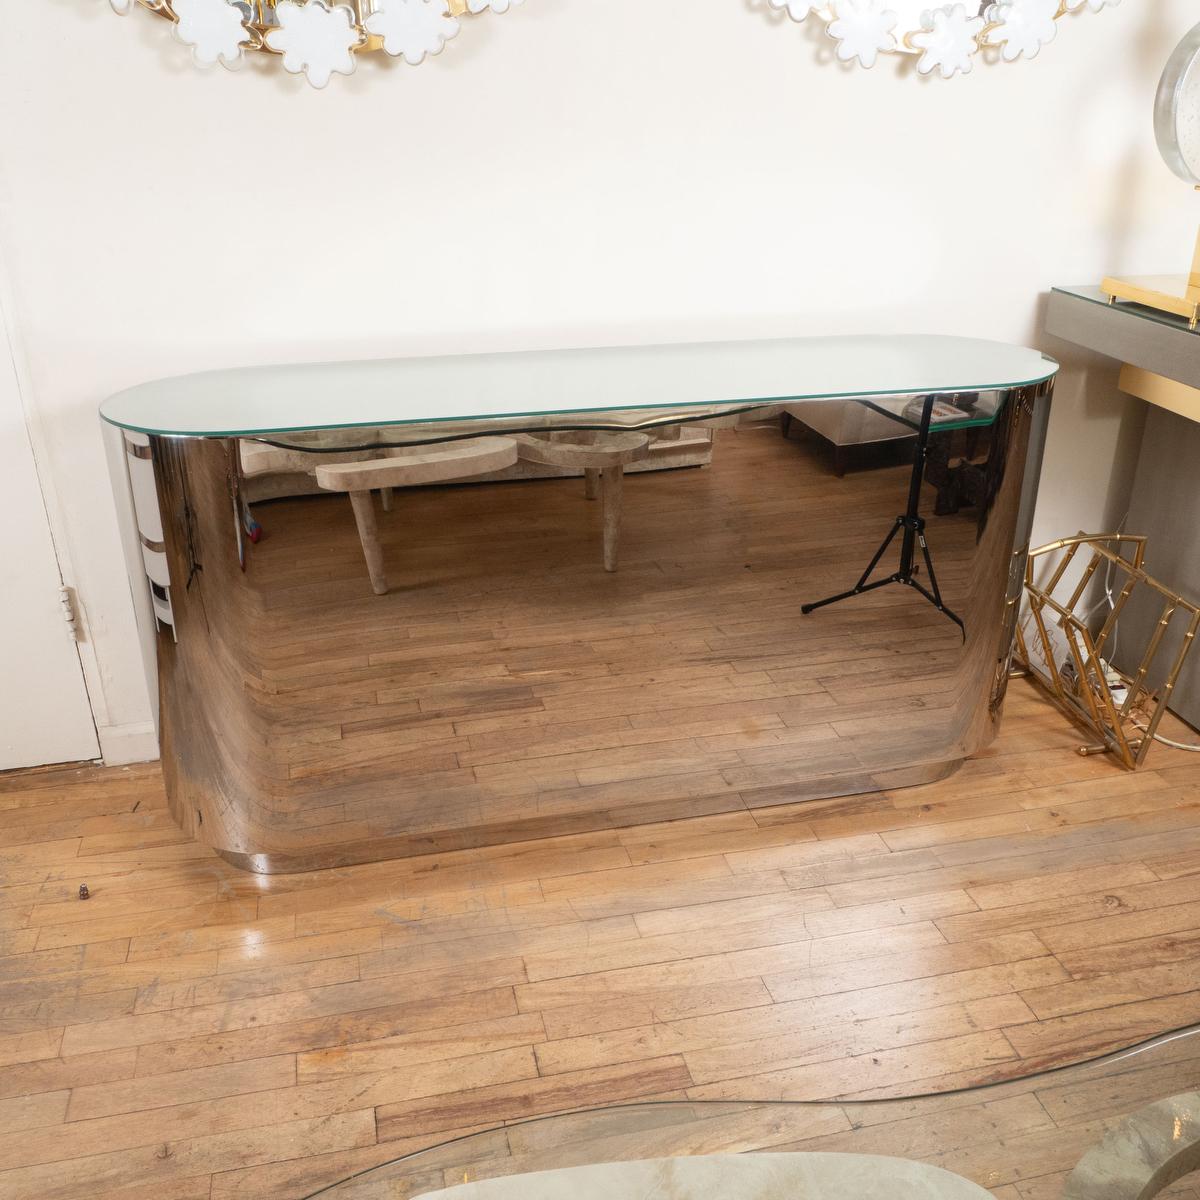 Stainless steel oval console with glass top.